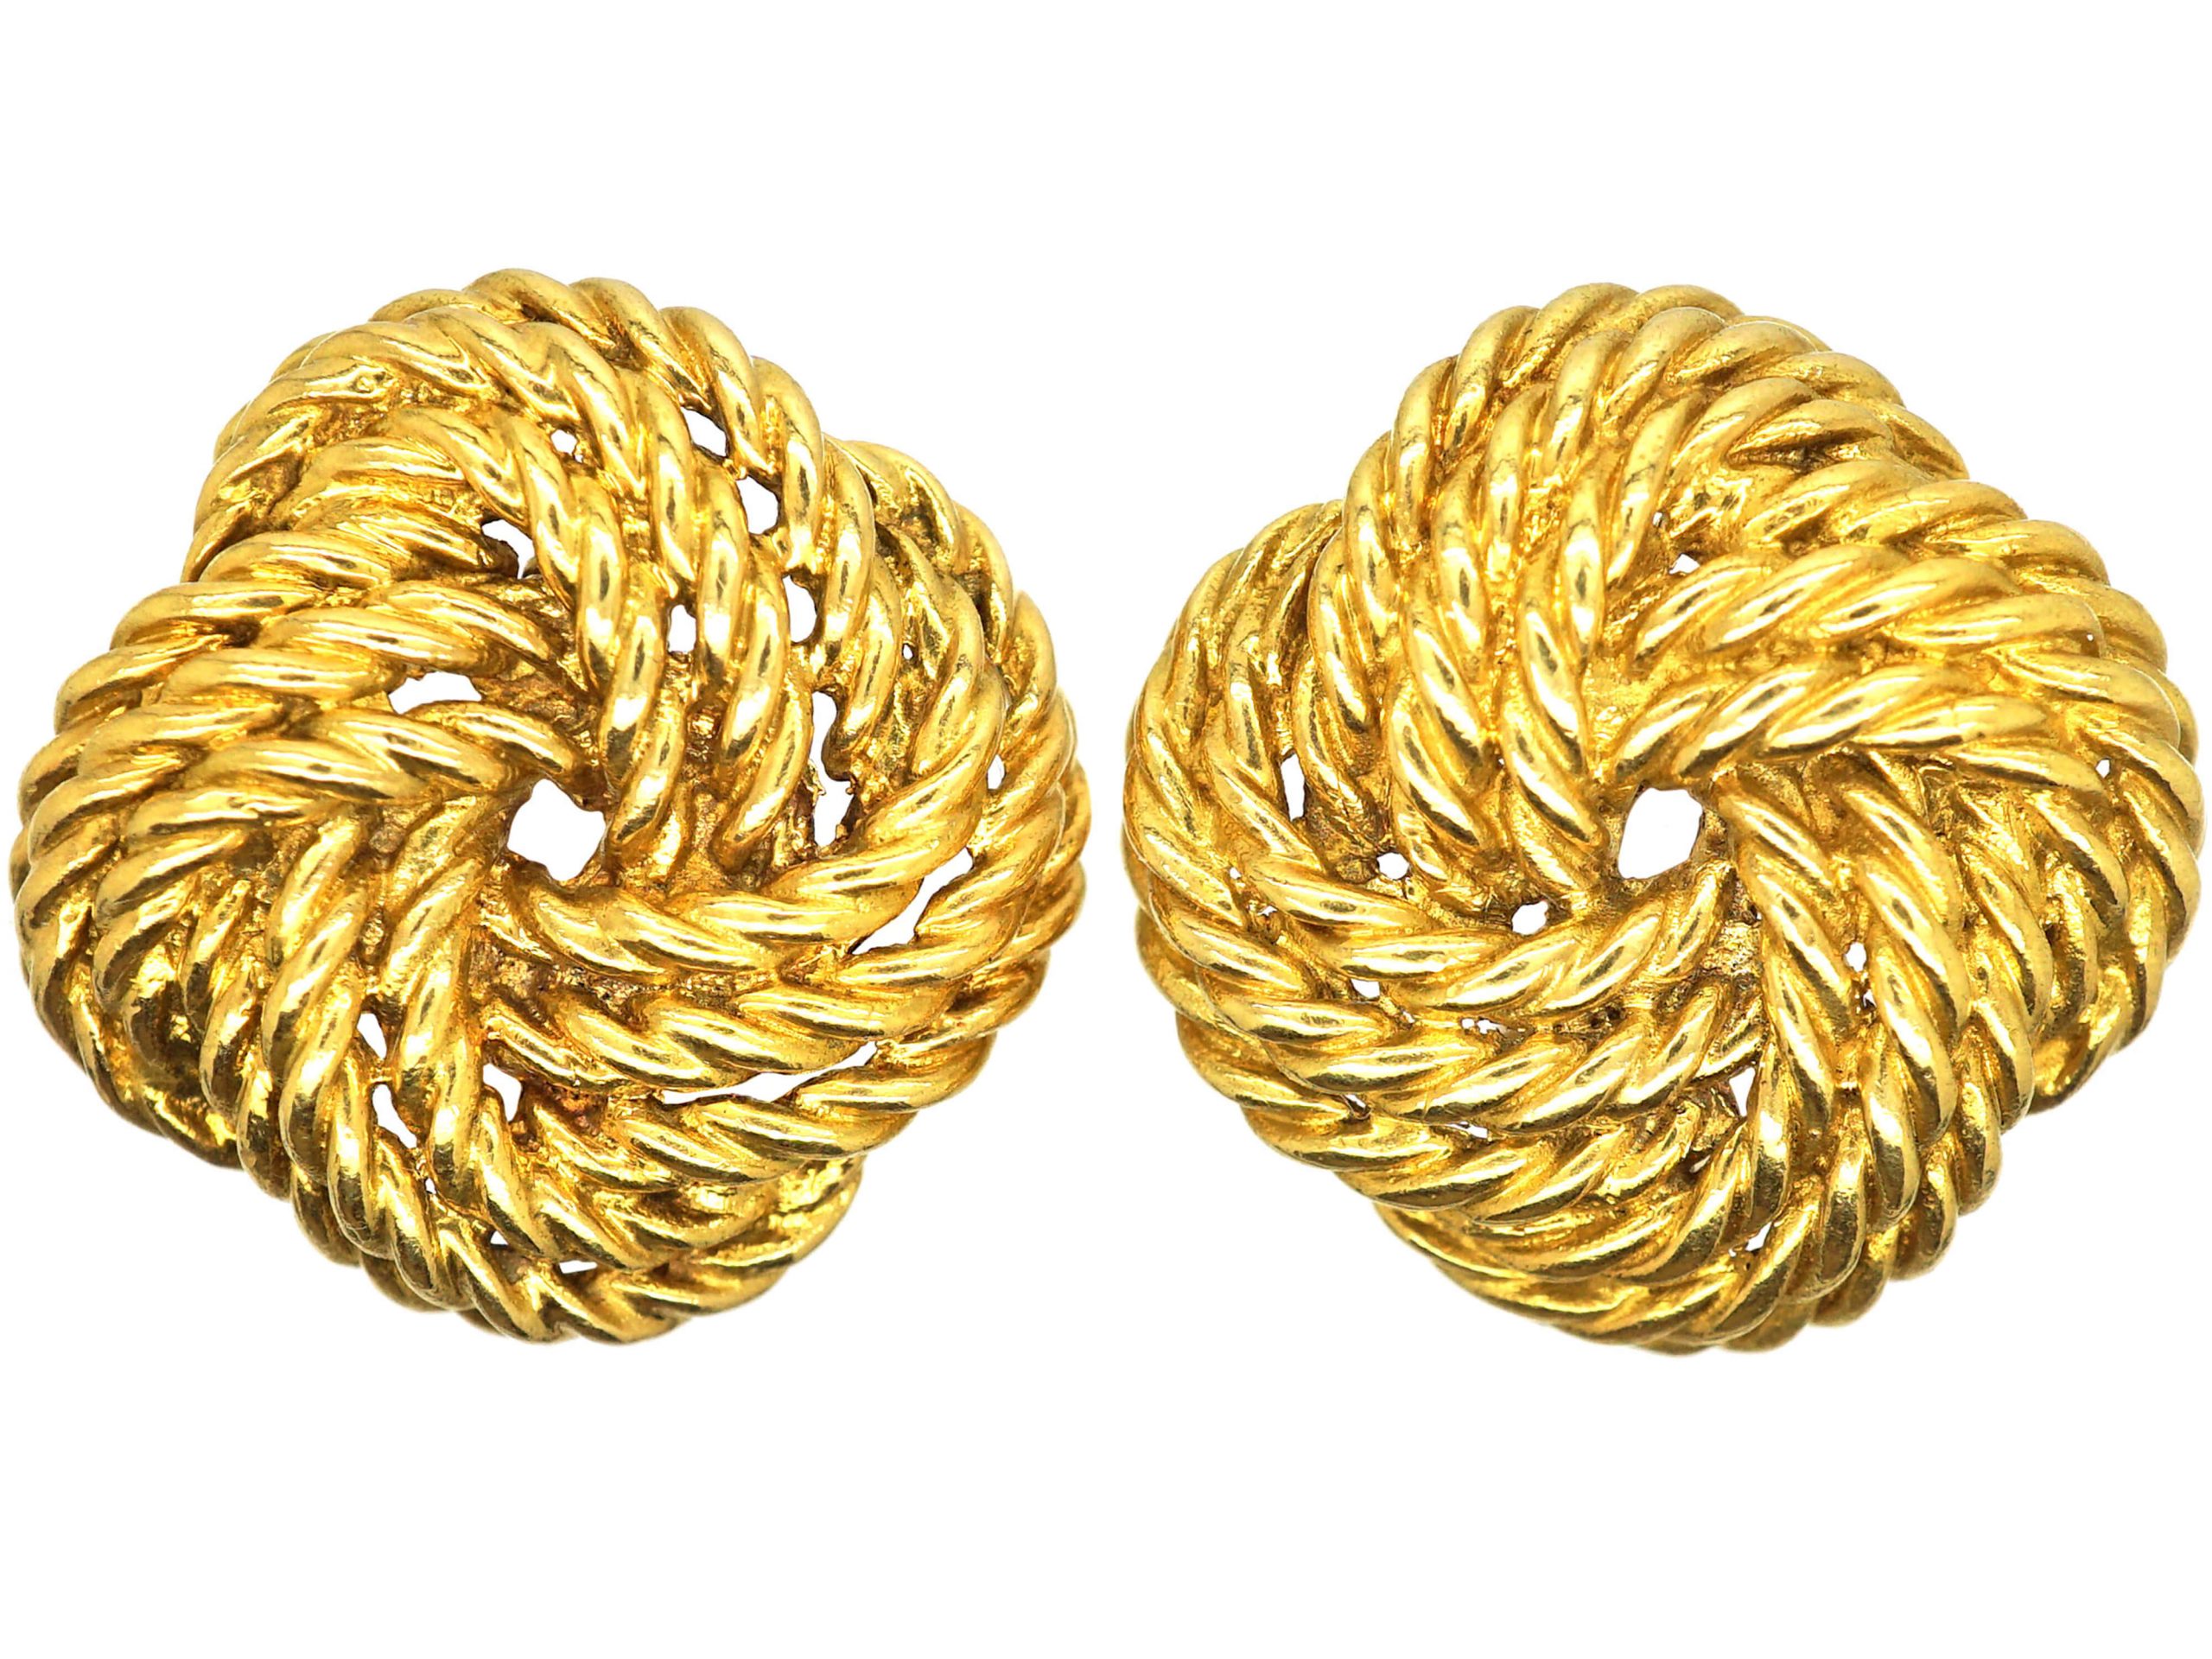 18ct Gold Clip On Knot Earrings by Boucheron